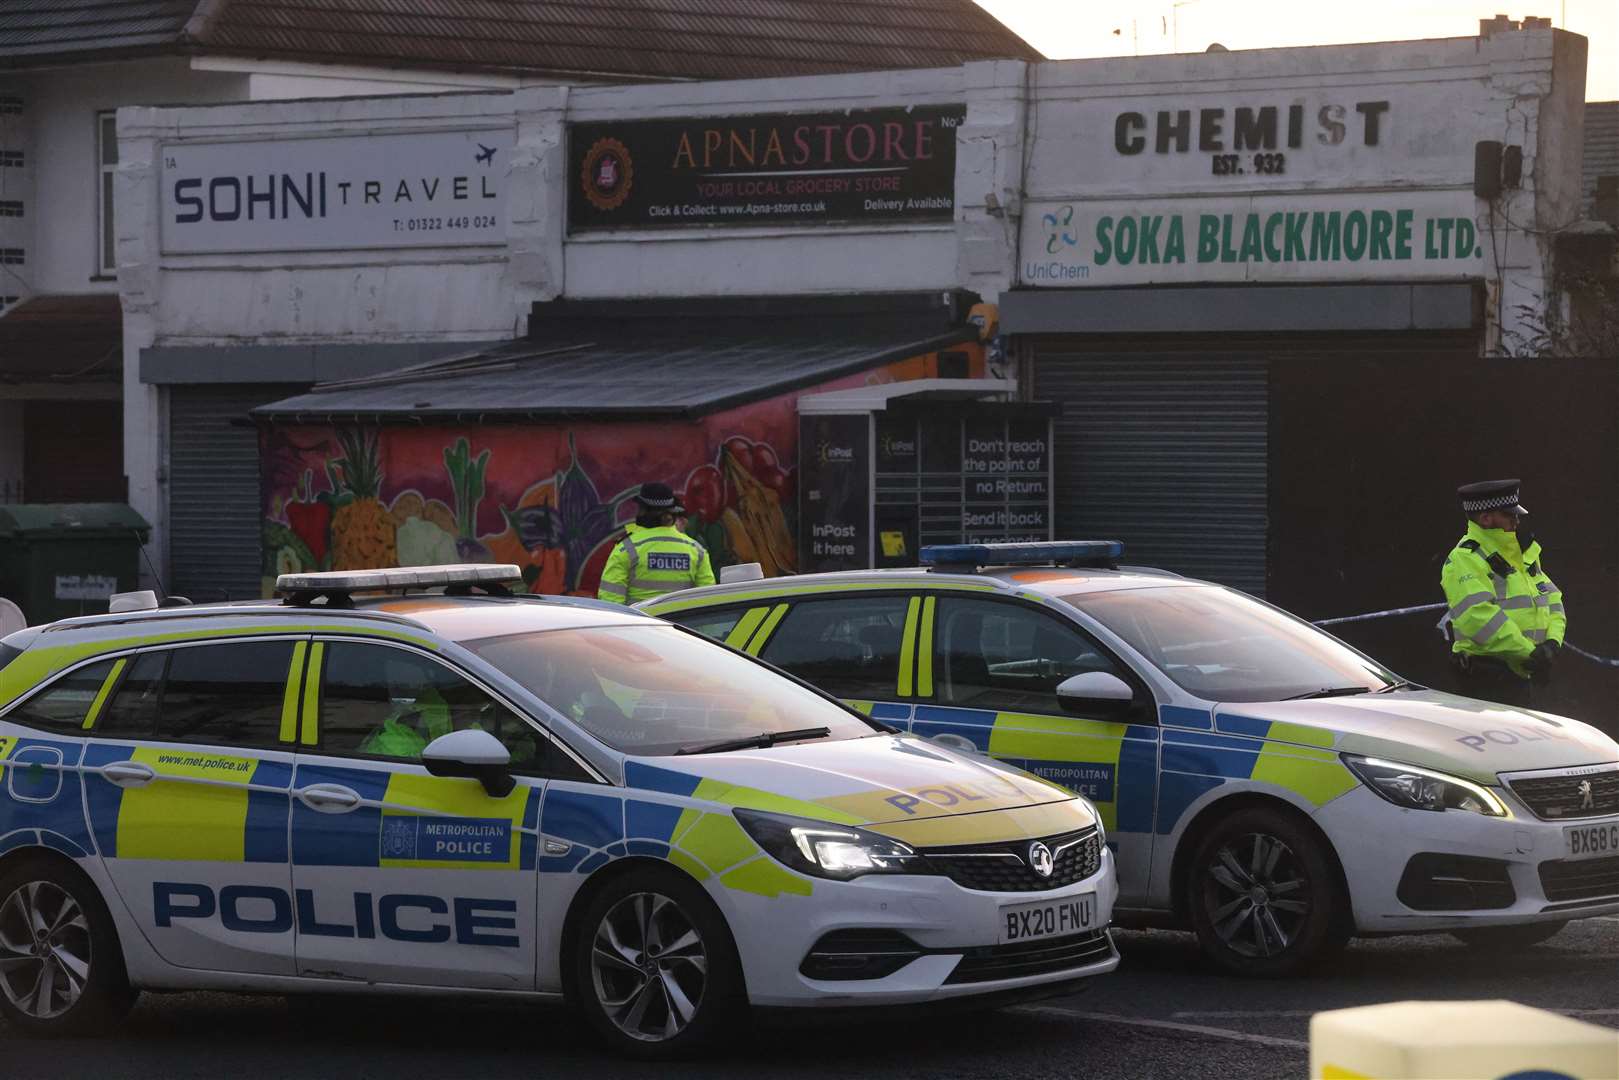 A murder investigation is underway following a shooting in Erith Picture: UKNIP